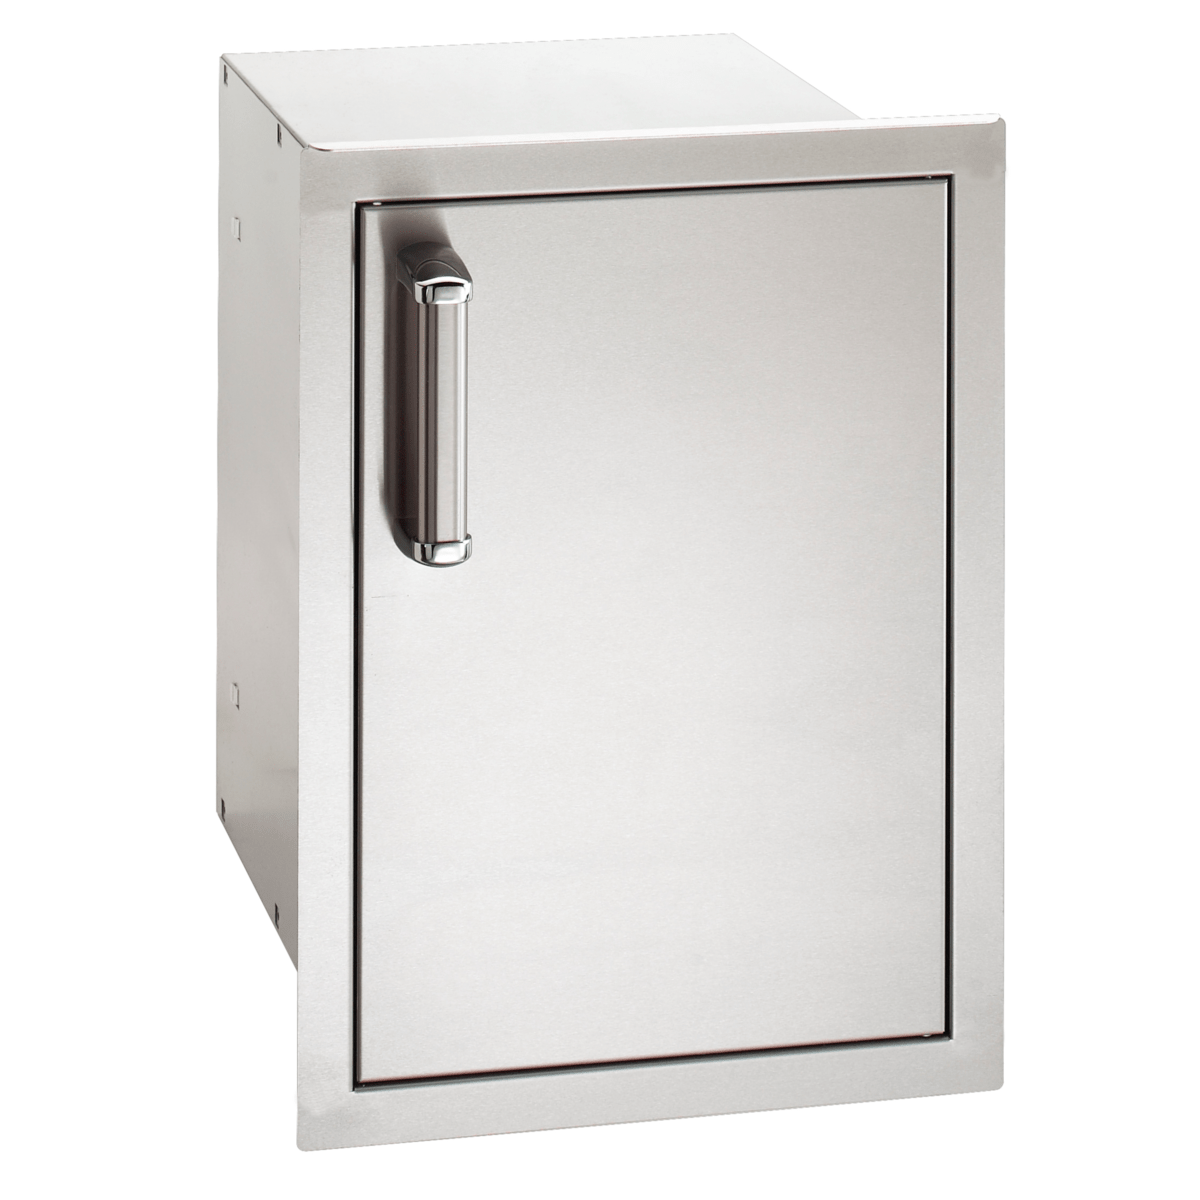 Fire Magic Flush Single Door with Dual Drawers - Kitchen King Direct